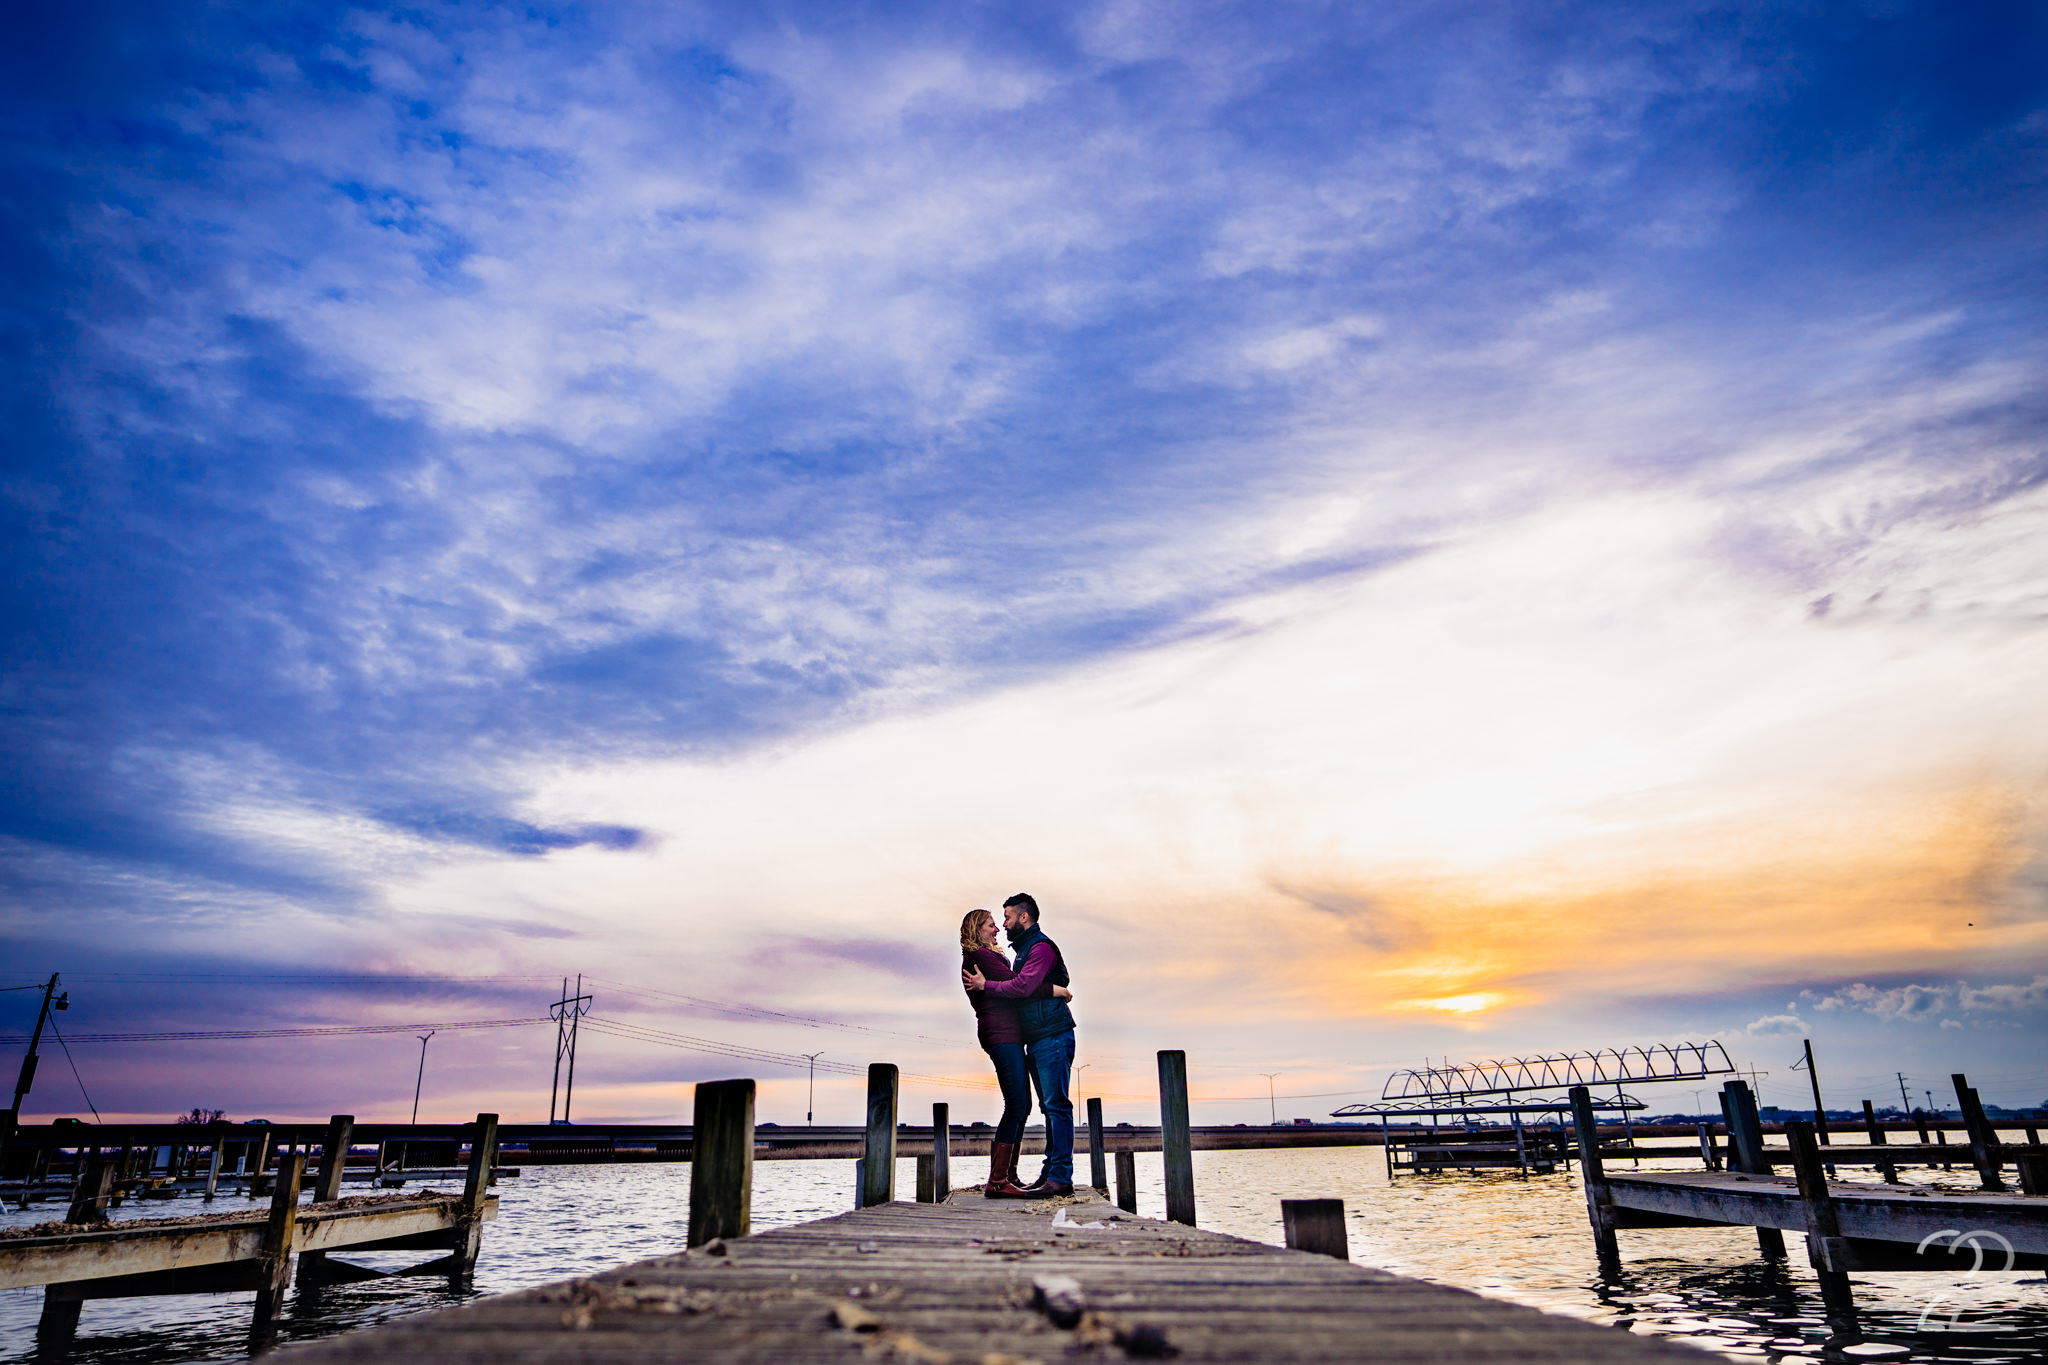  Waterfront views, a cuddly couple and a Madison Wisconsin autumn sunset are the perfect recipe for a piece of art. Megan says an extra word of thanks when nature graces her with something extra special when shooting a couple’s shoot. 